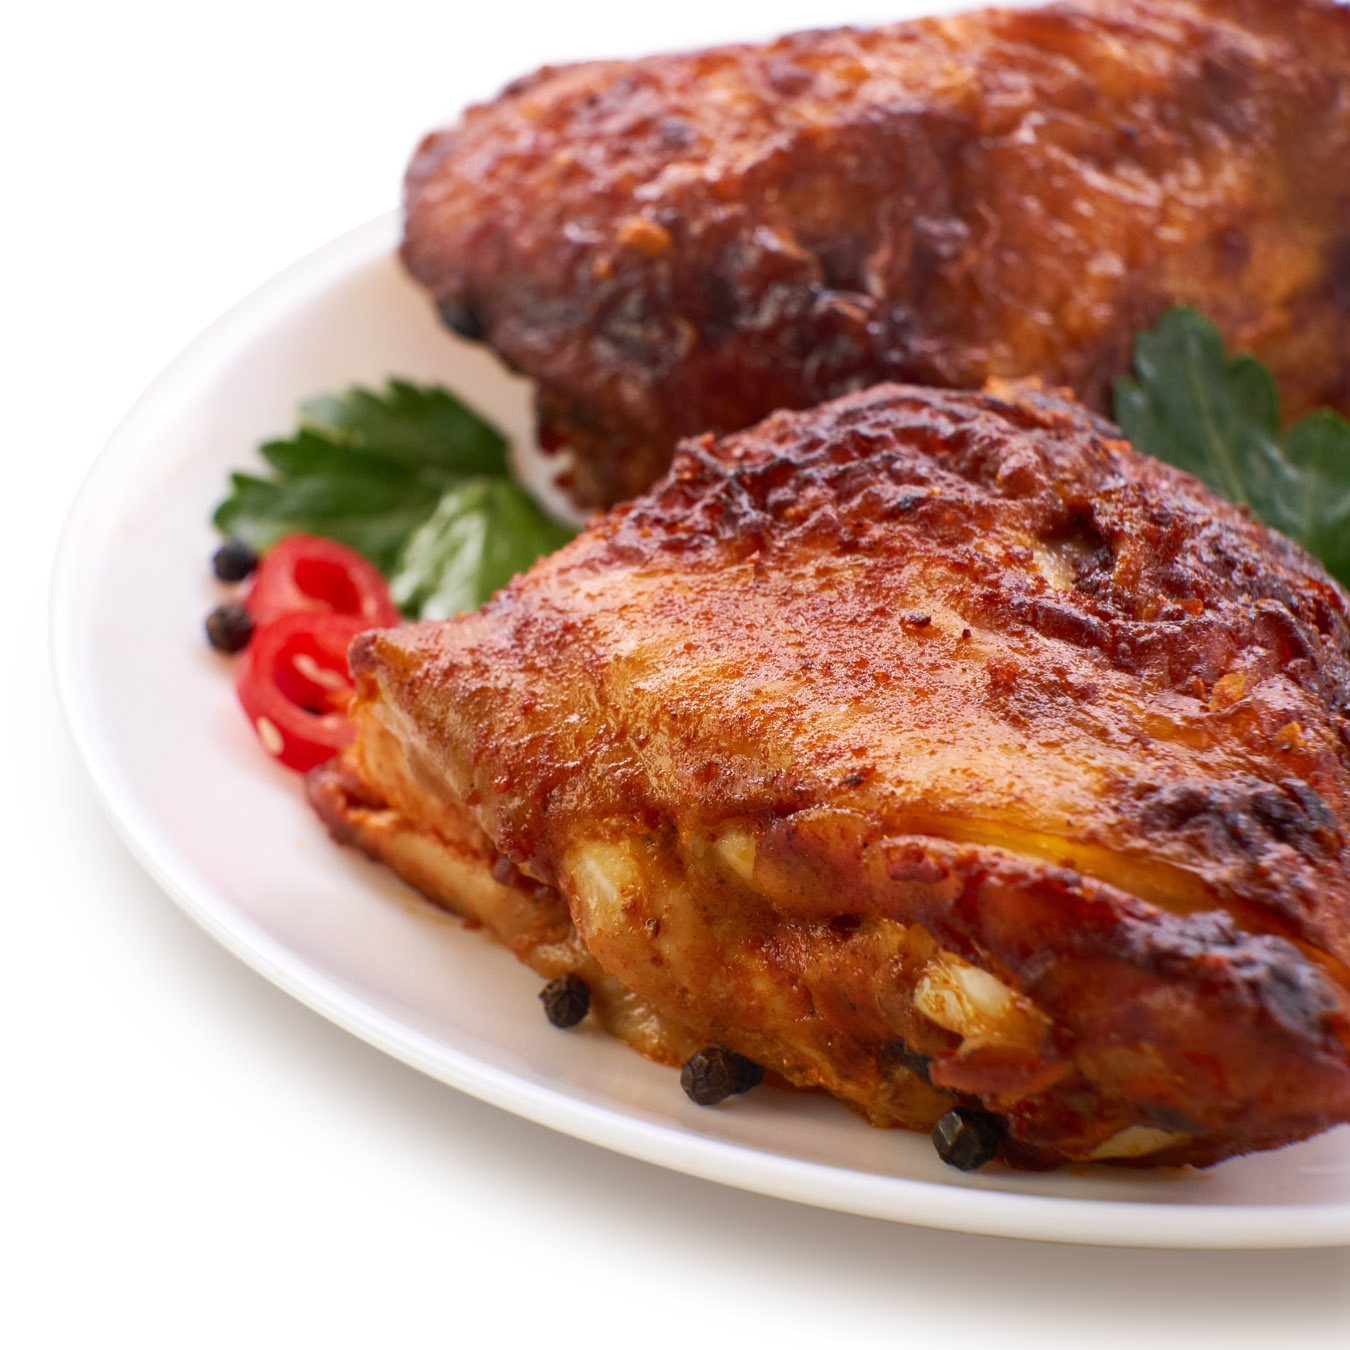 Chicken wings in grilled spices 1pcs (80-90g)